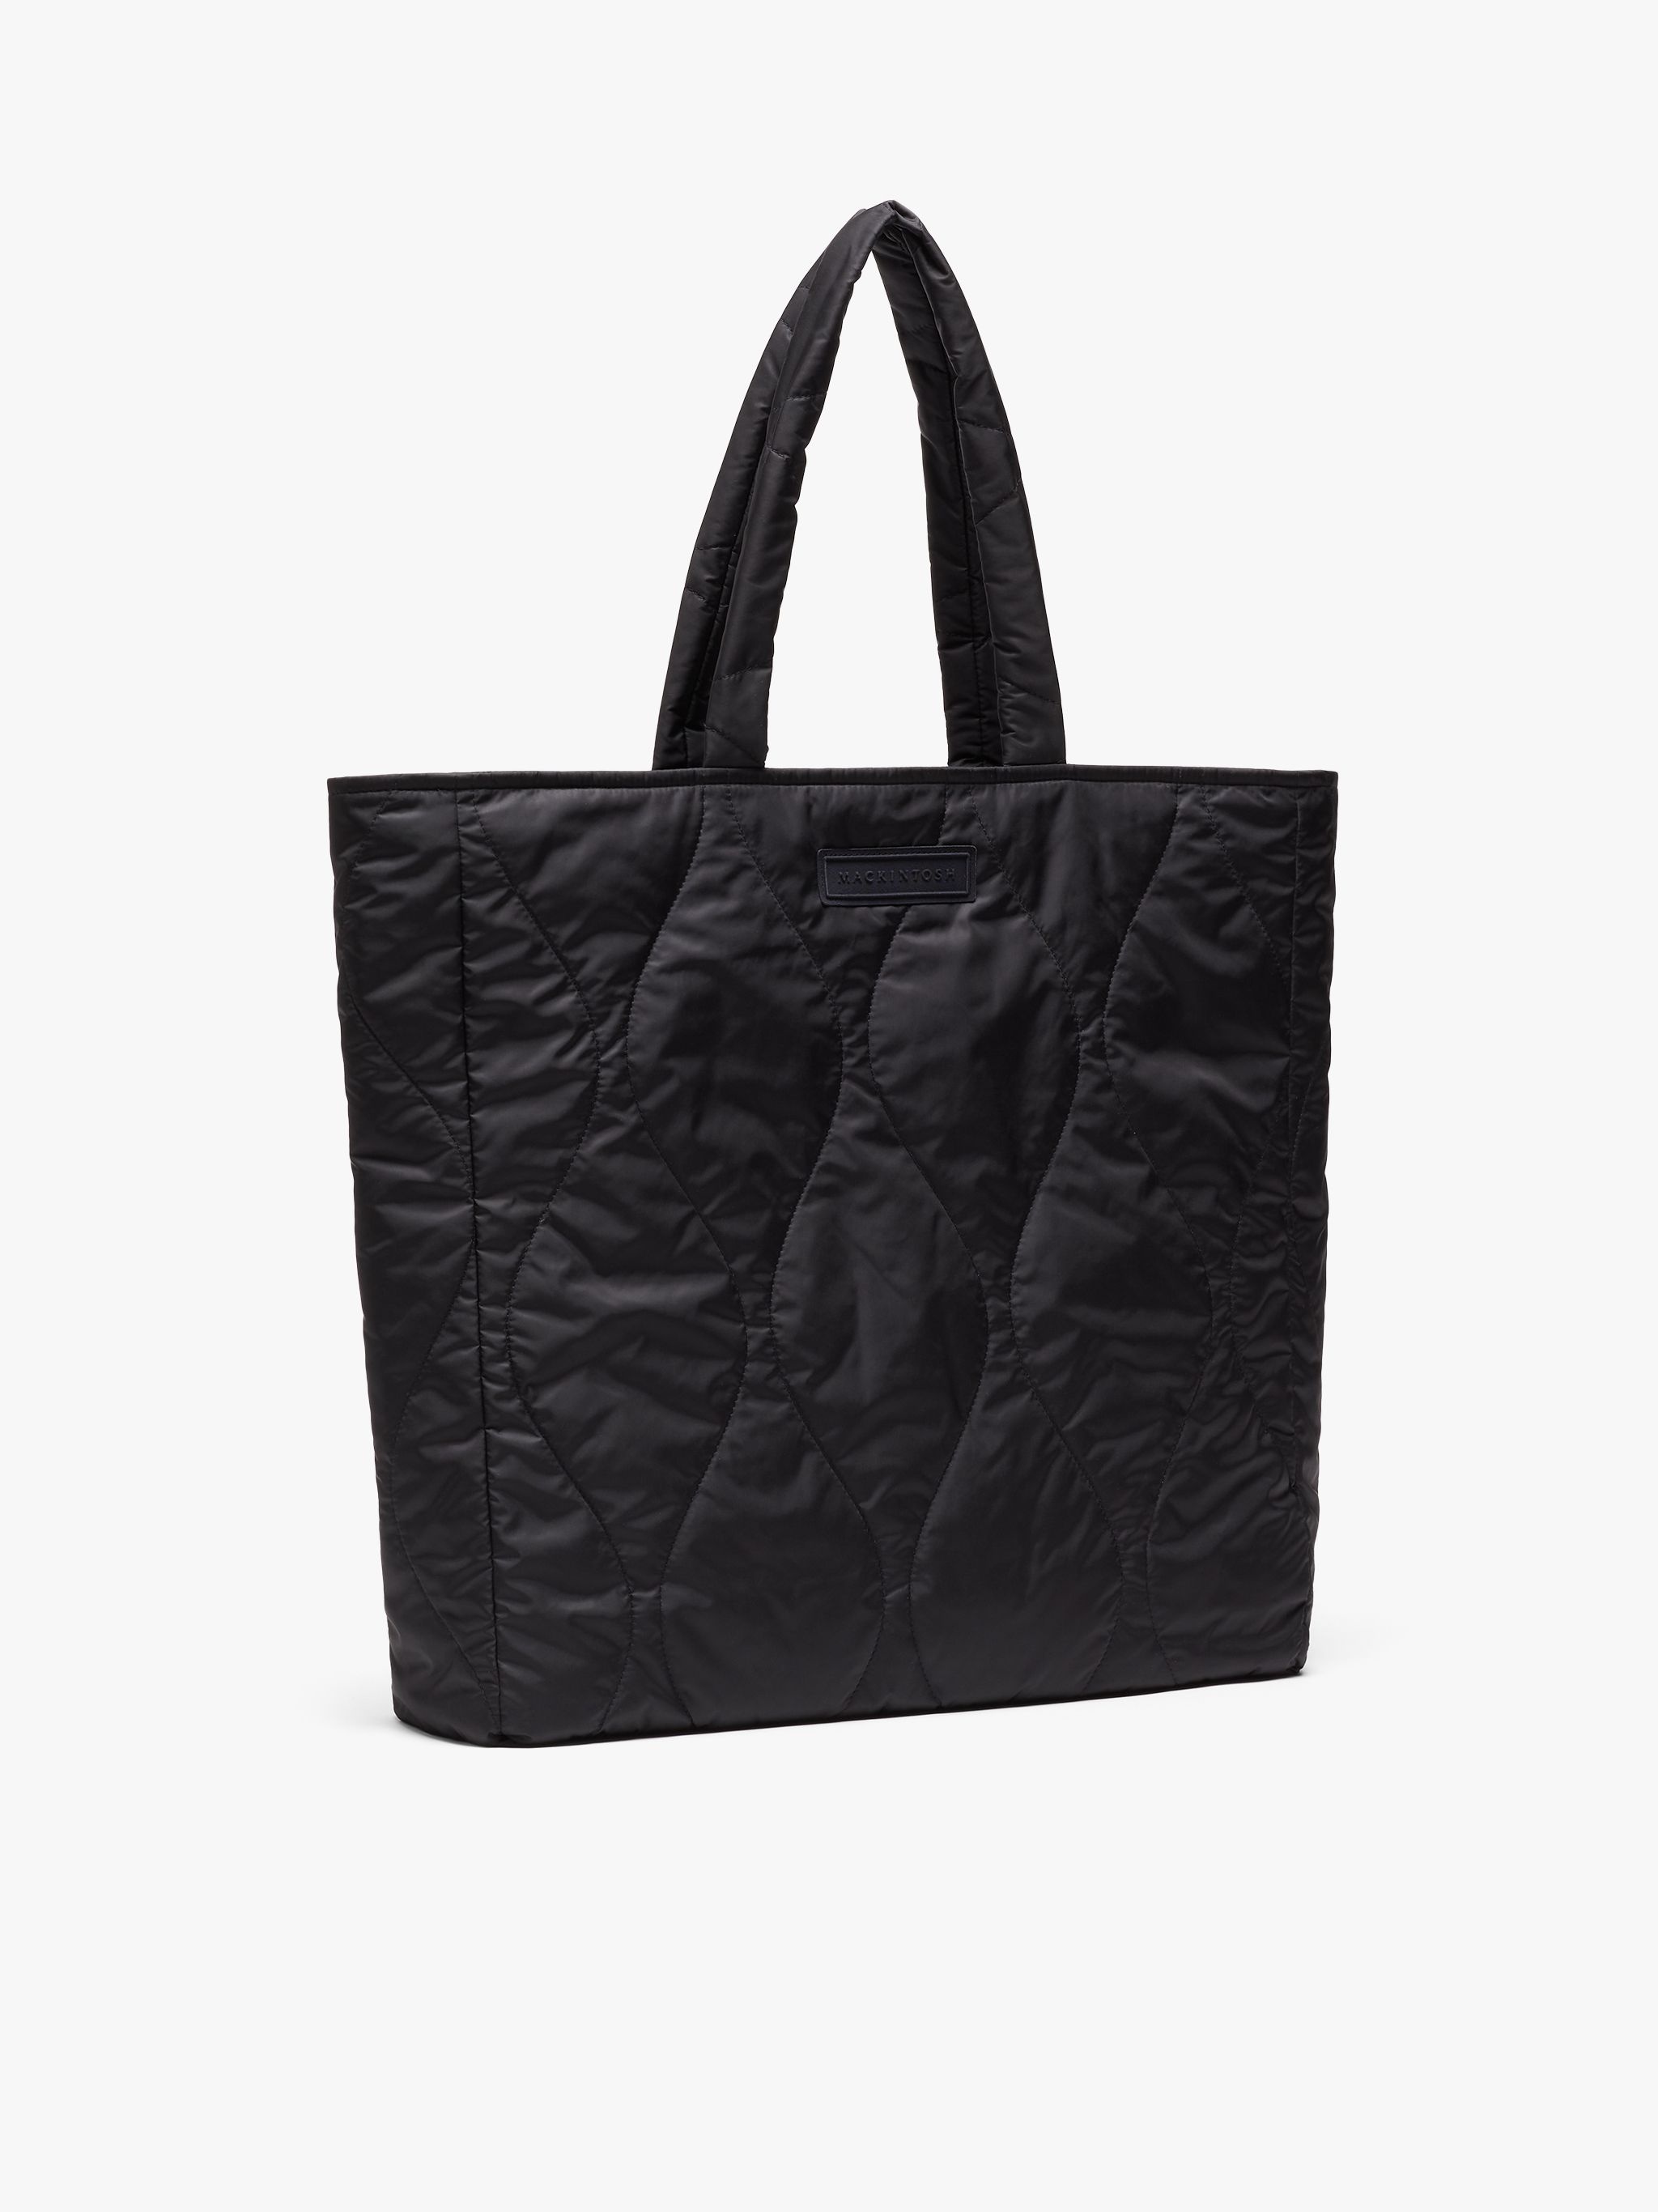 LEXIS BLACK QUILTED NYLON BAG | ACC-BA02 - 3